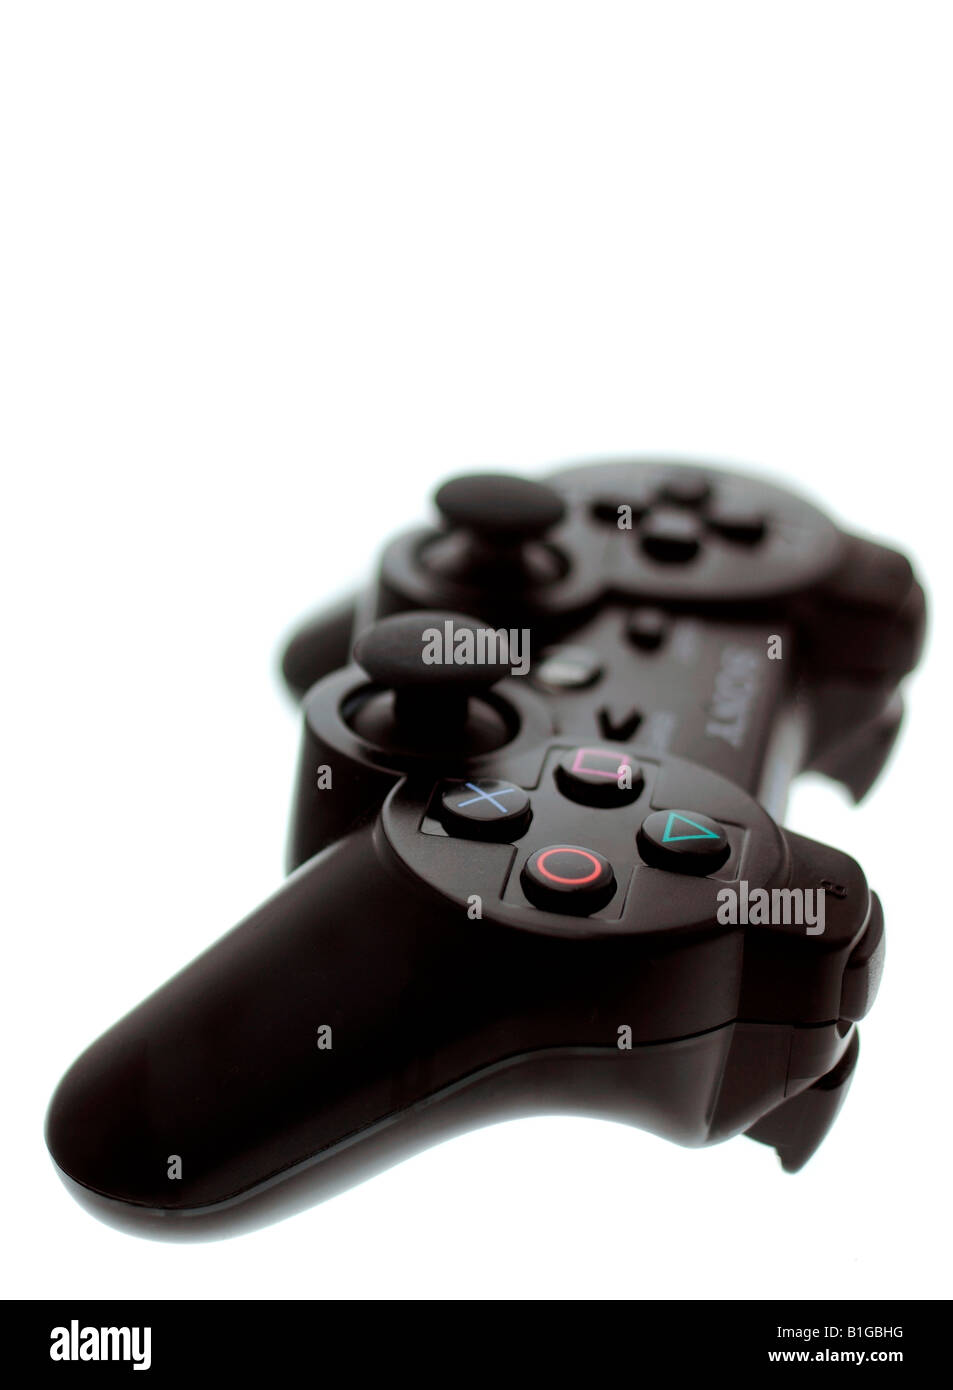 Play Station Wireless PS3 Hand Controller Stock Photo